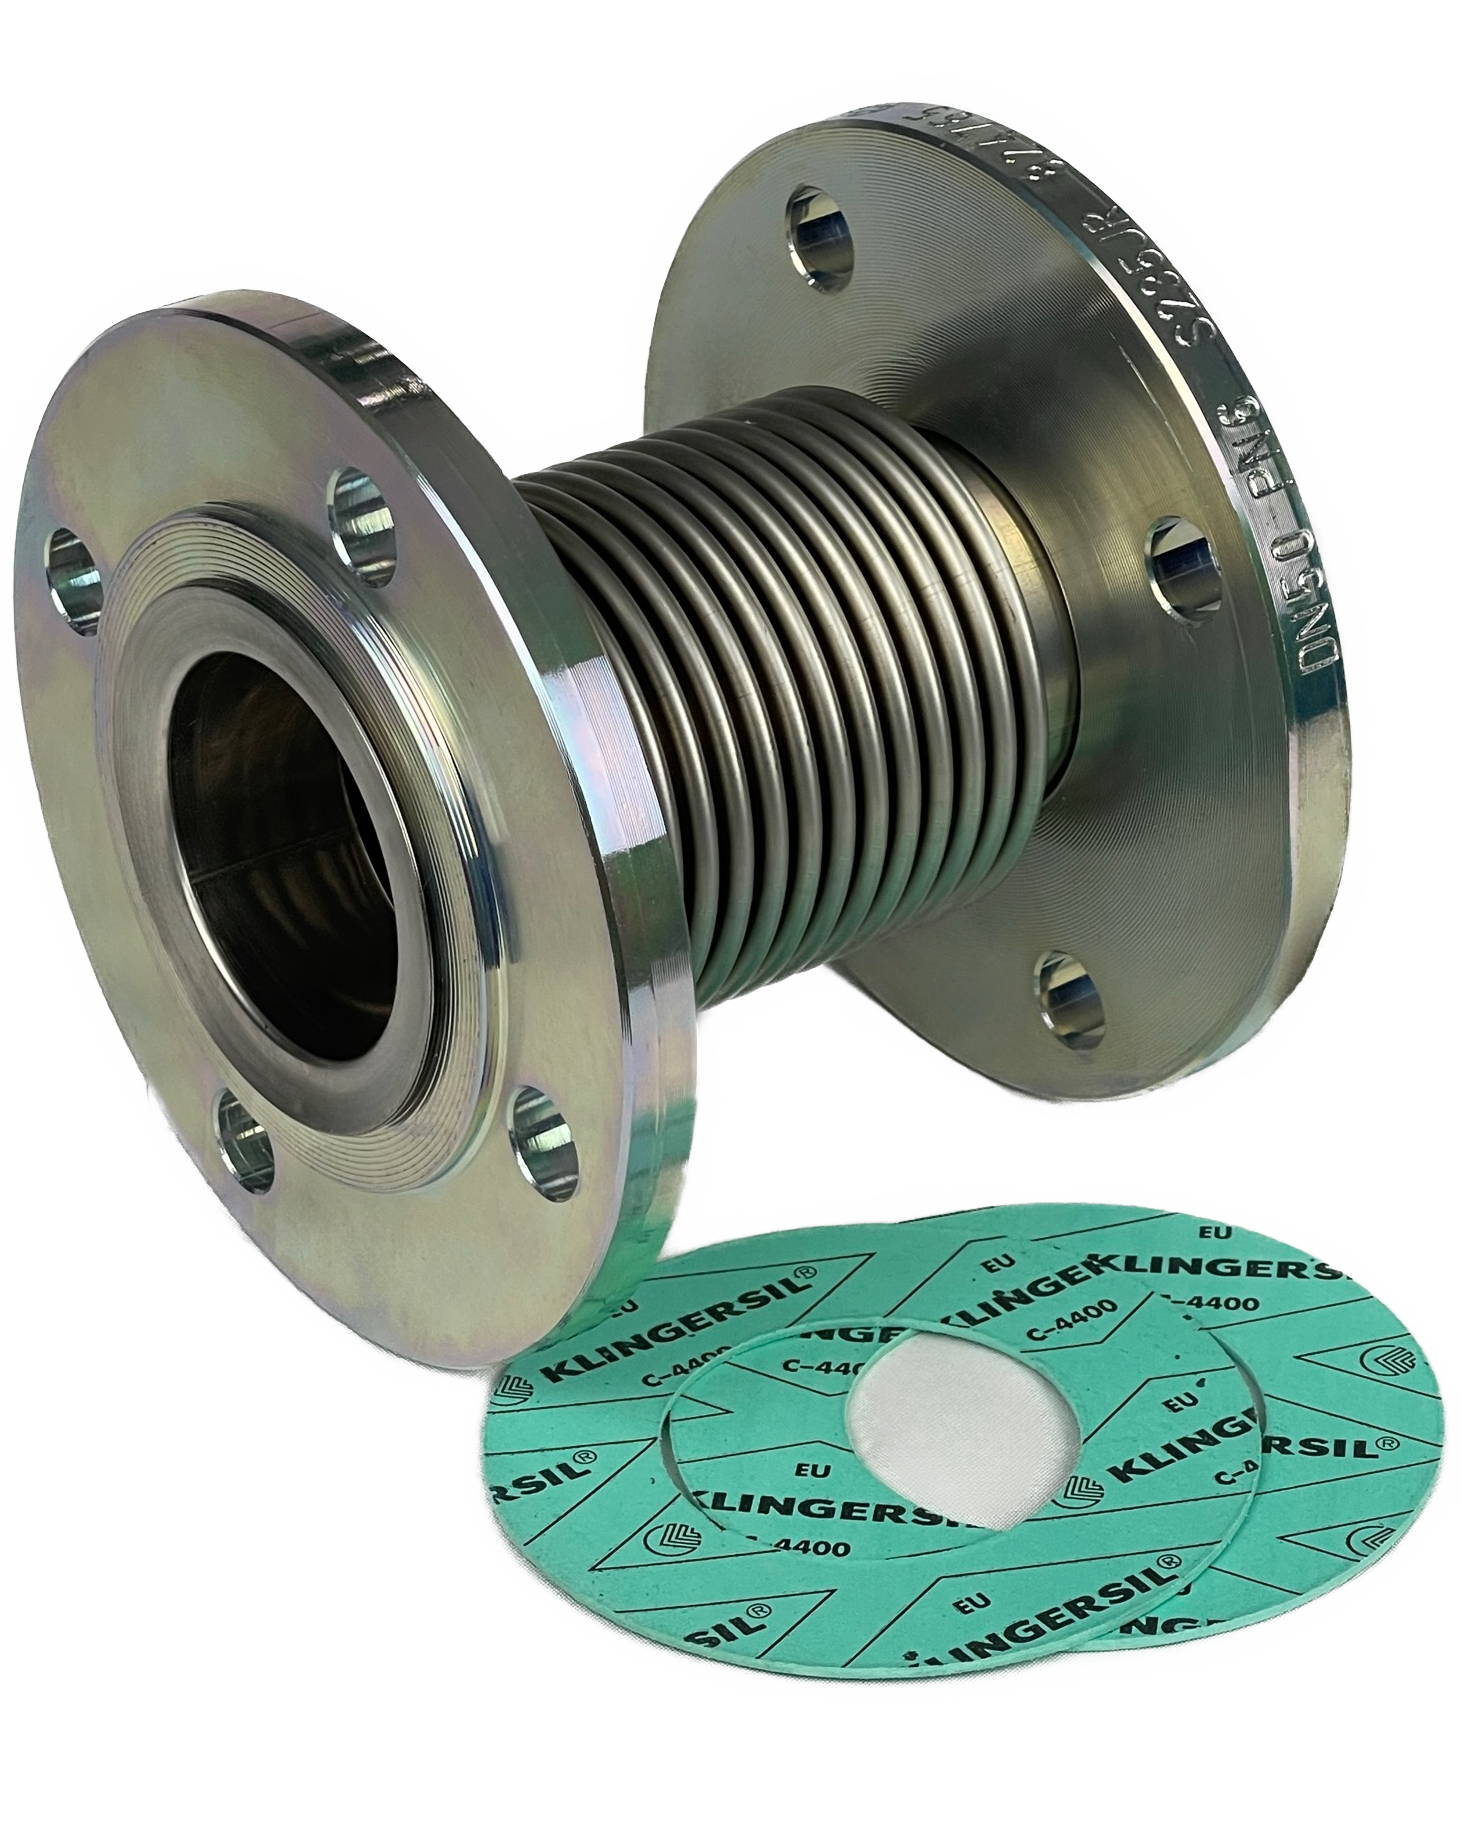 Vibration absorber with loose flanges - Typ BOA Alpha-C